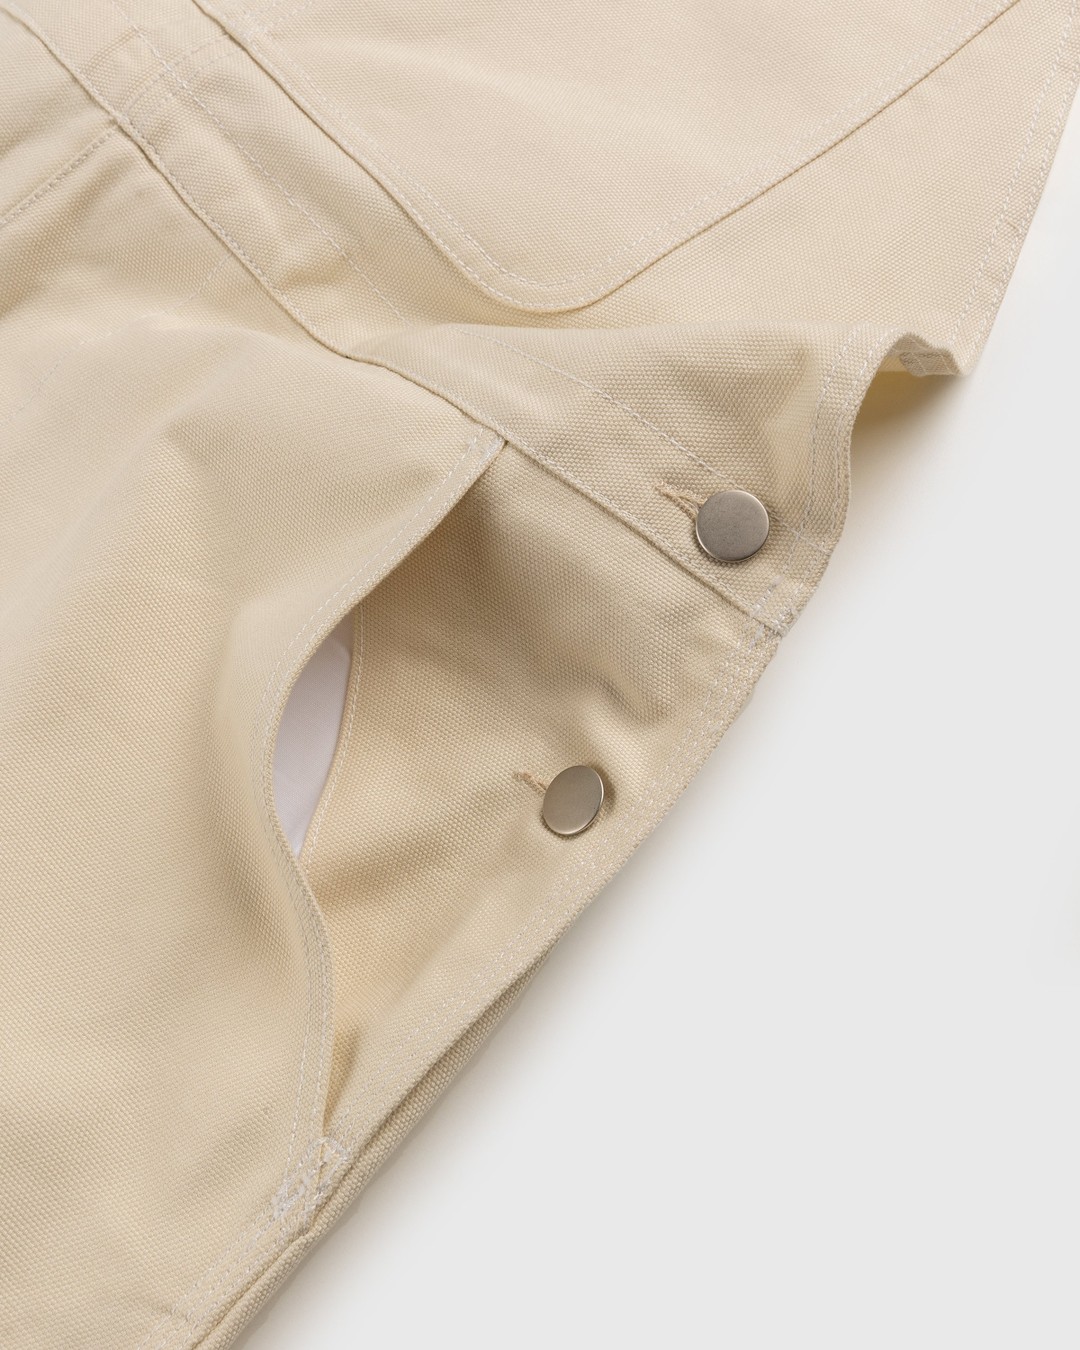 RUF x Highsnobiety – Cotton Overalls Natural - Trousers - Beige - Image 7